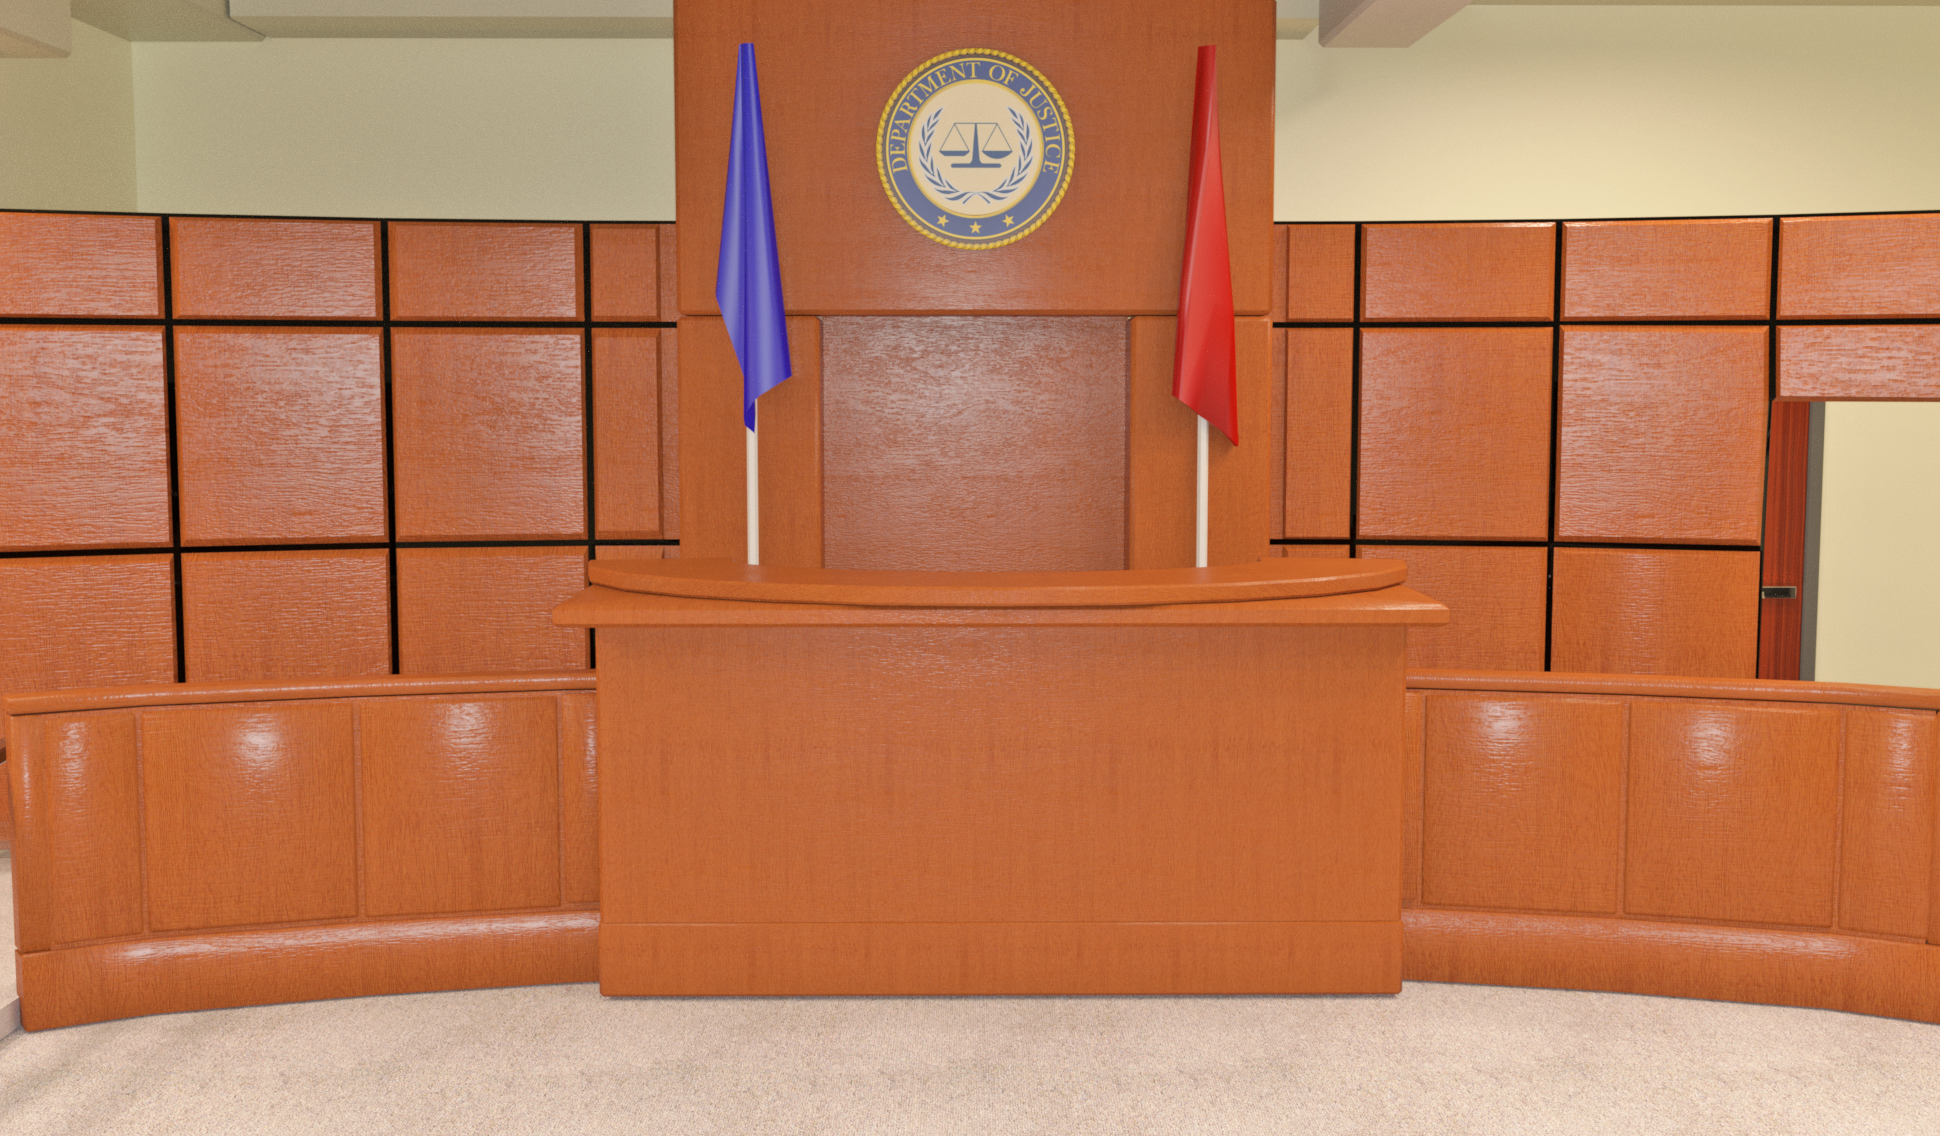 INT. COURTROOM 1 – DAY